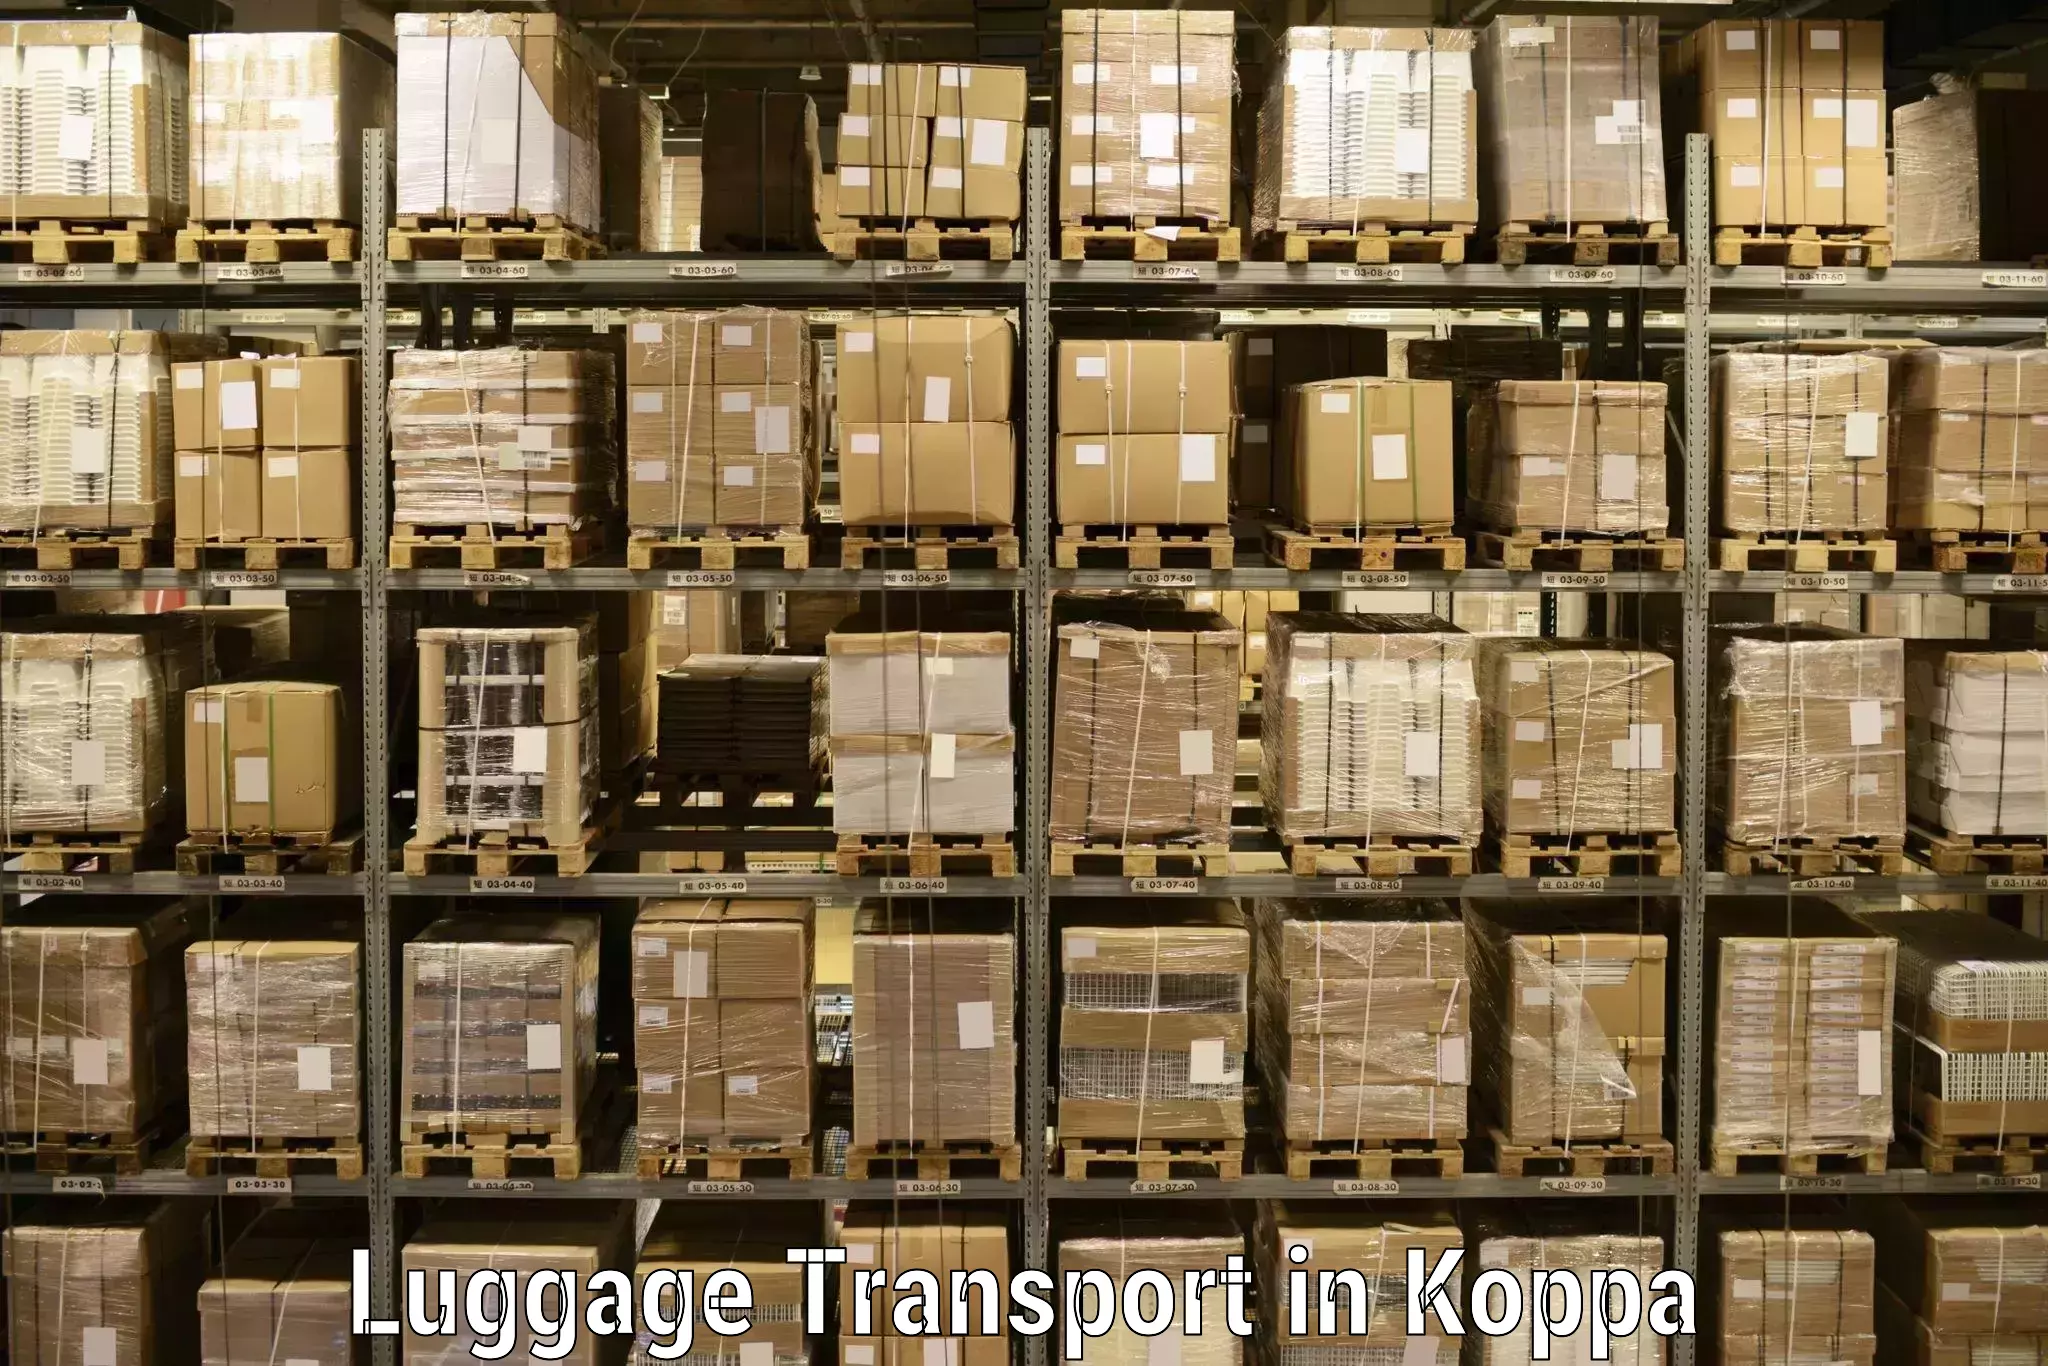 Luggage transport consulting in Koppa